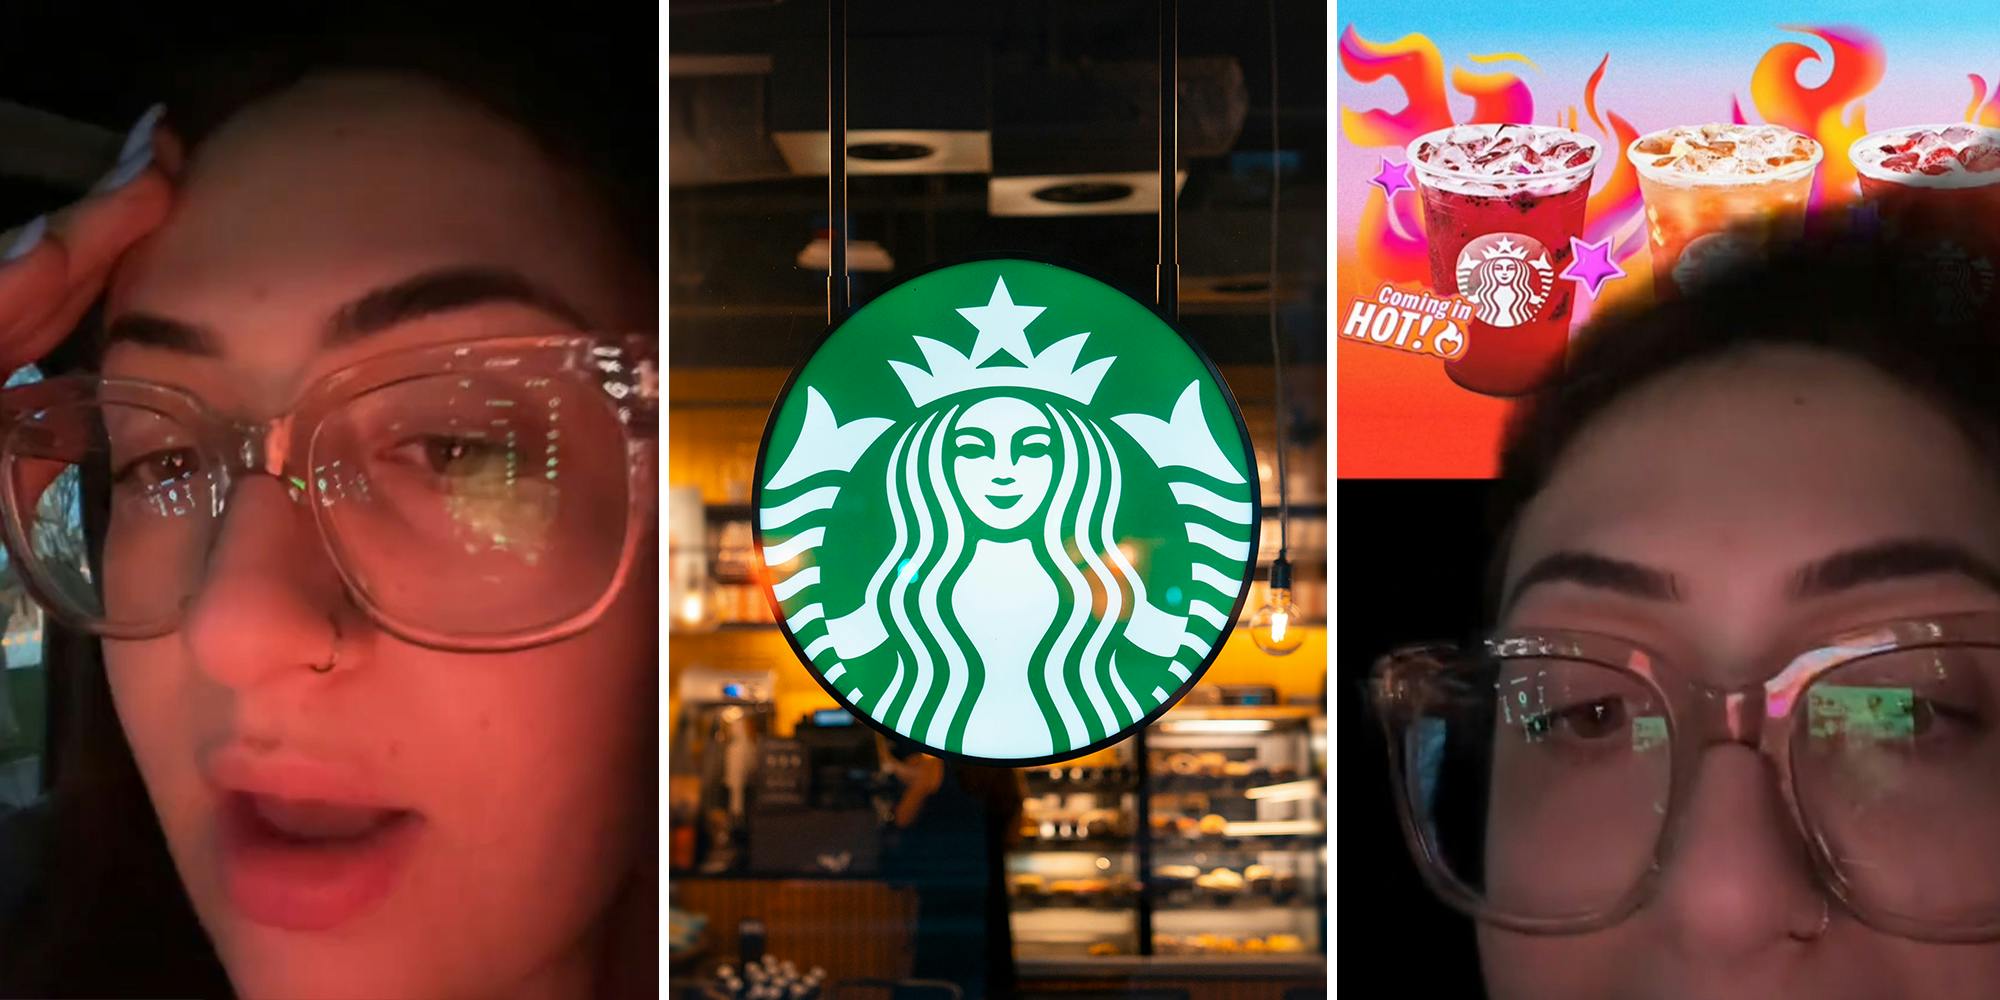 ‘That is an inside job. They are trying to take Starbucks down’: Woman speculates this is what’s going on with Starbucks’ new, weird concoctions